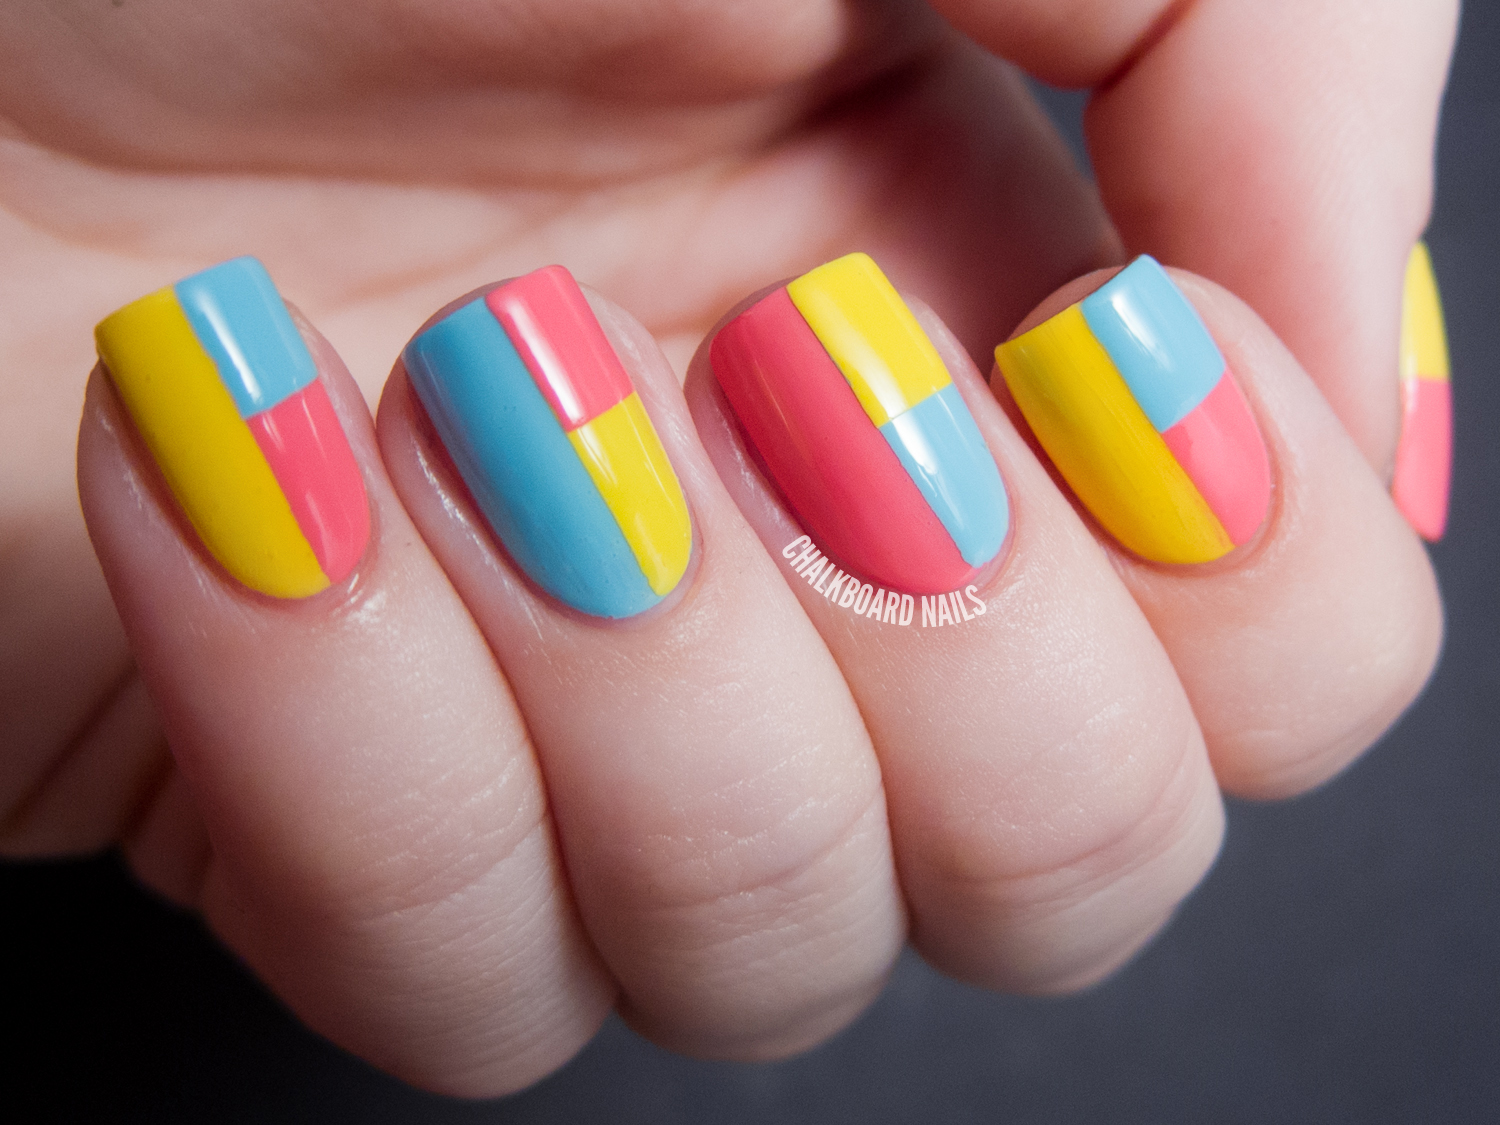 8. "Color Block Nail Tutorial with Glitter Accents" - wide 3